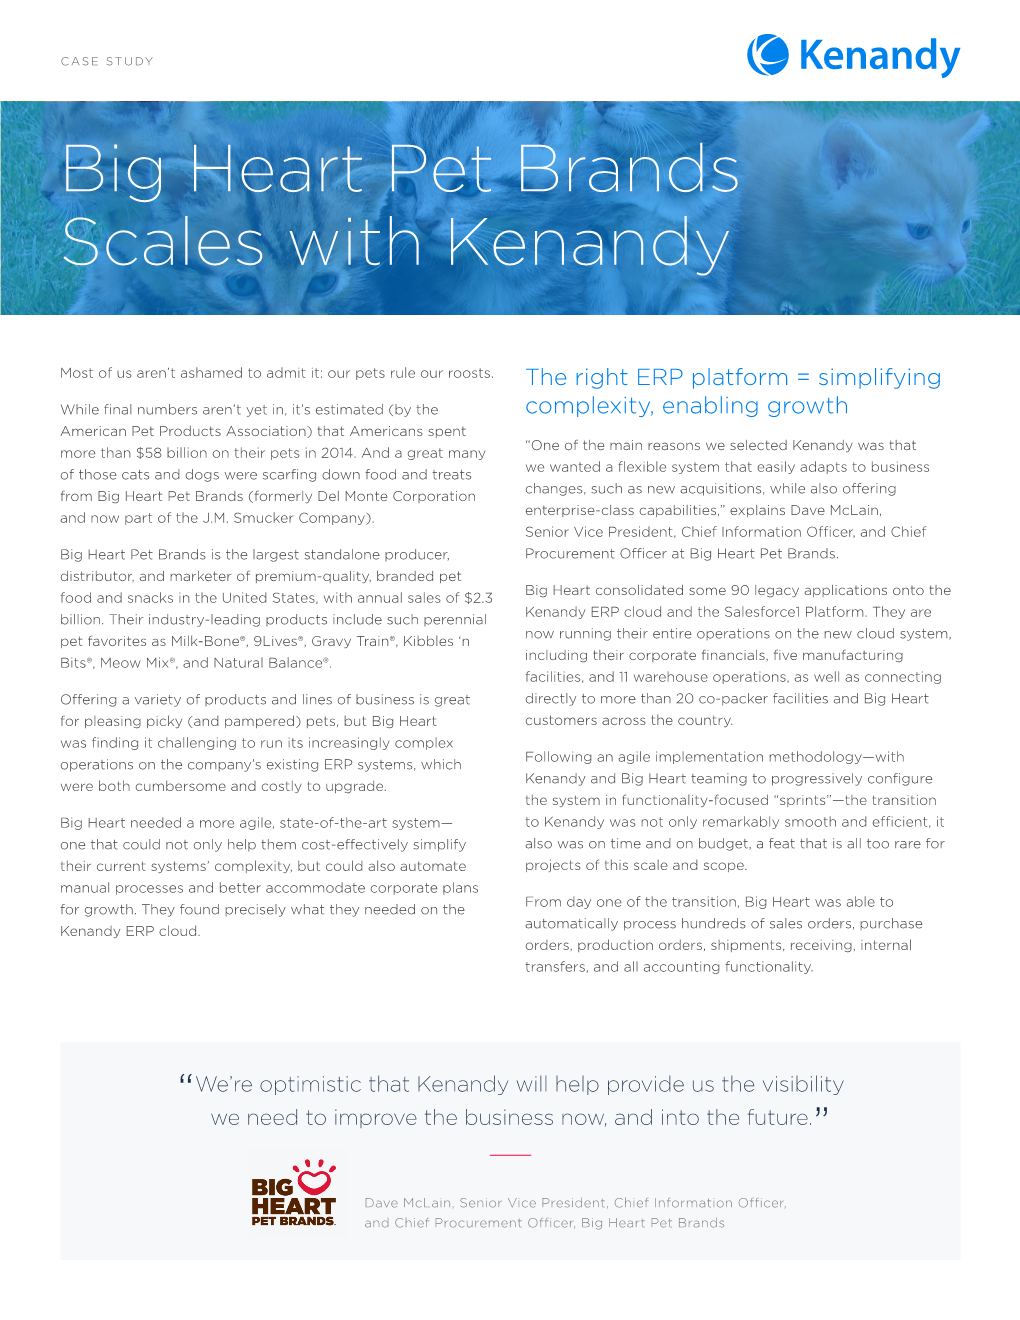 Big Heart Pet Brands Scales with Kenandy